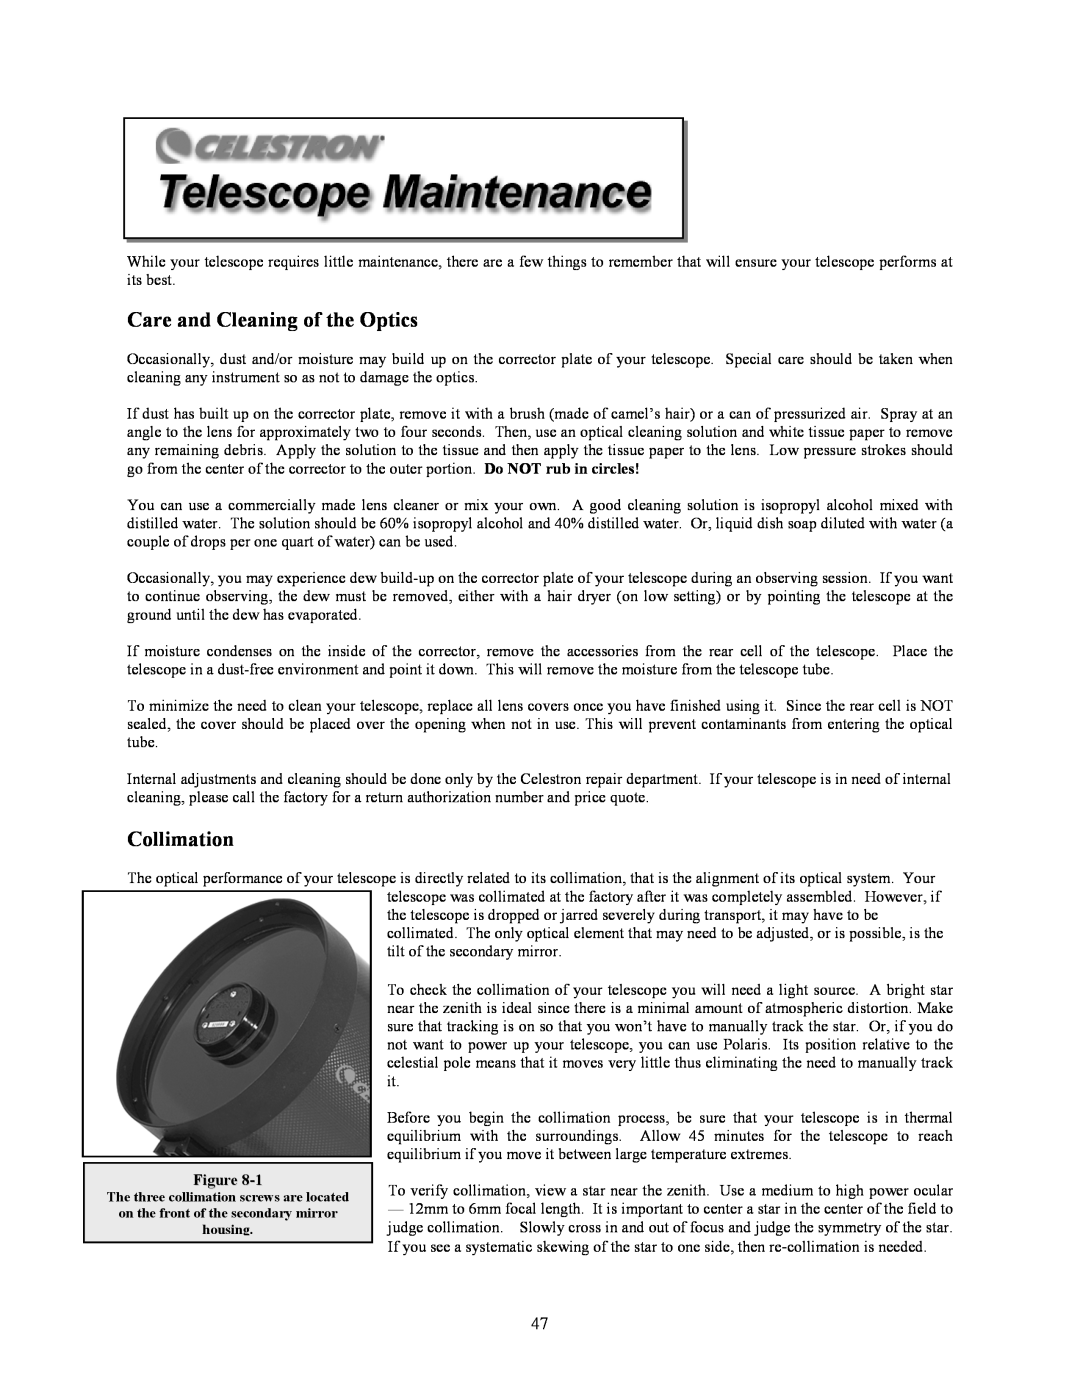 Celestron C5-S, C8-S, C9-S instruction manual Care and Cleaning of the Optics, Collimation 